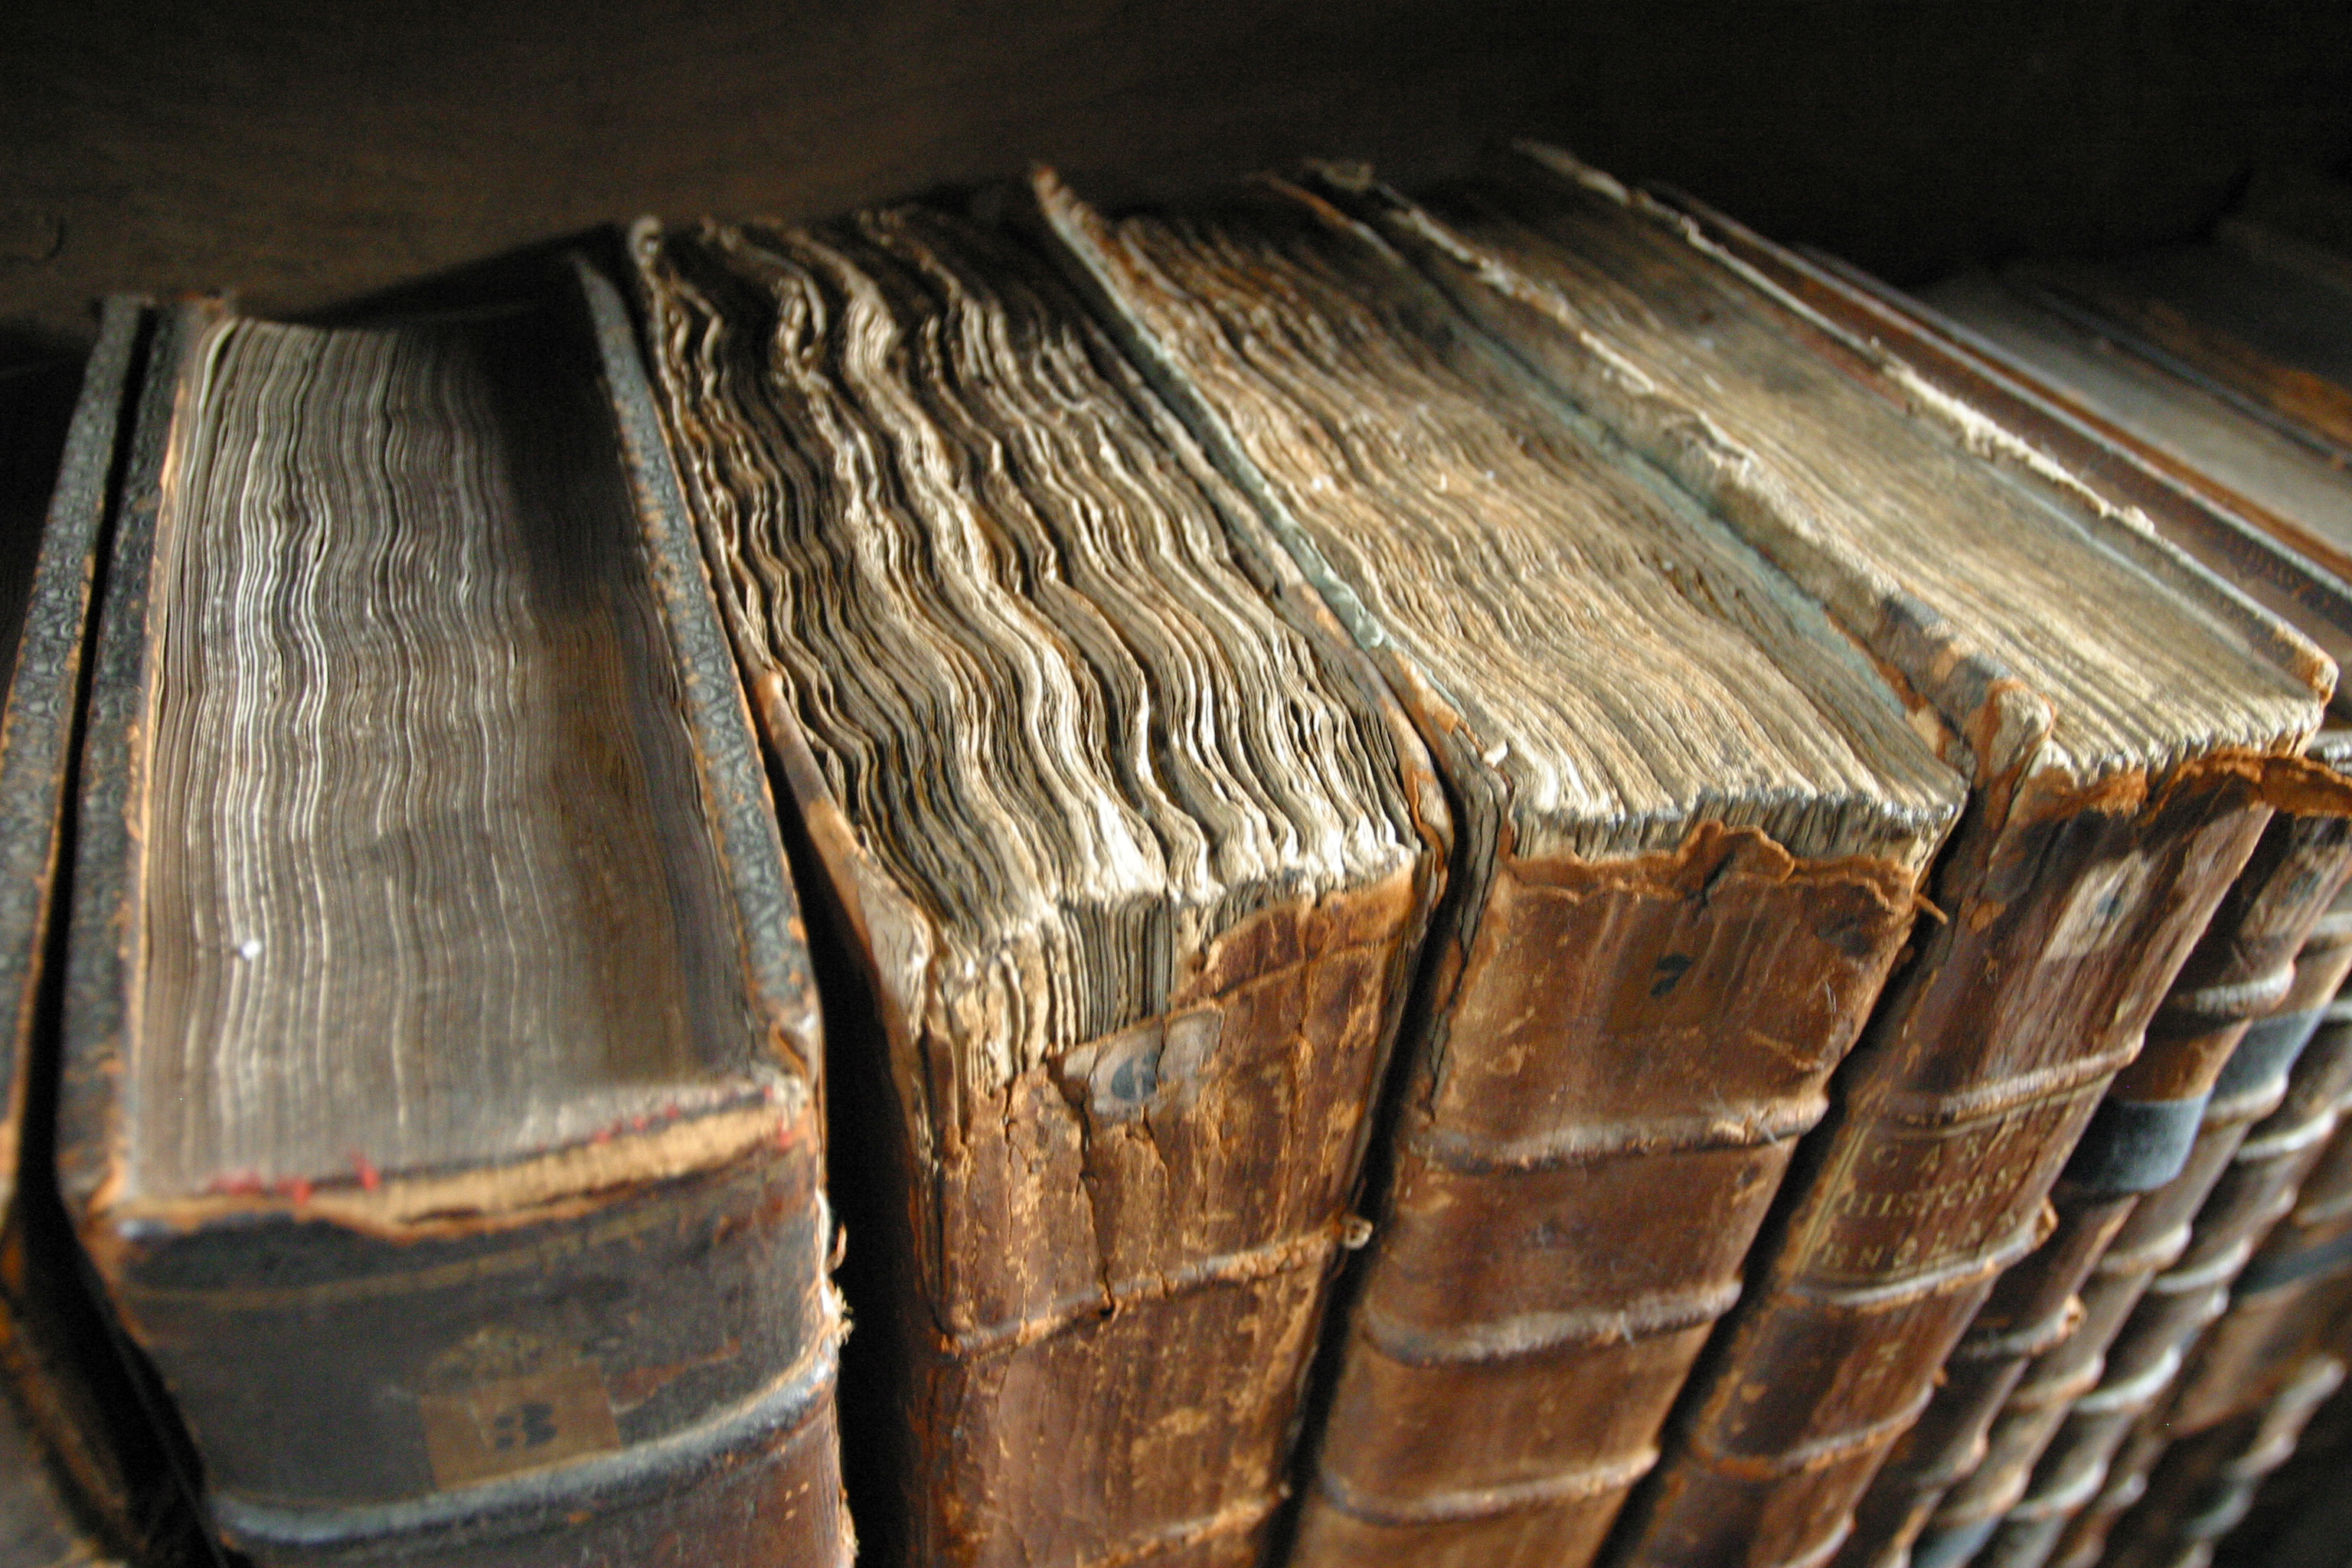 Tom Murphy, Worn books at the library of Merton College, Oxford. CC BY-SA 3.0